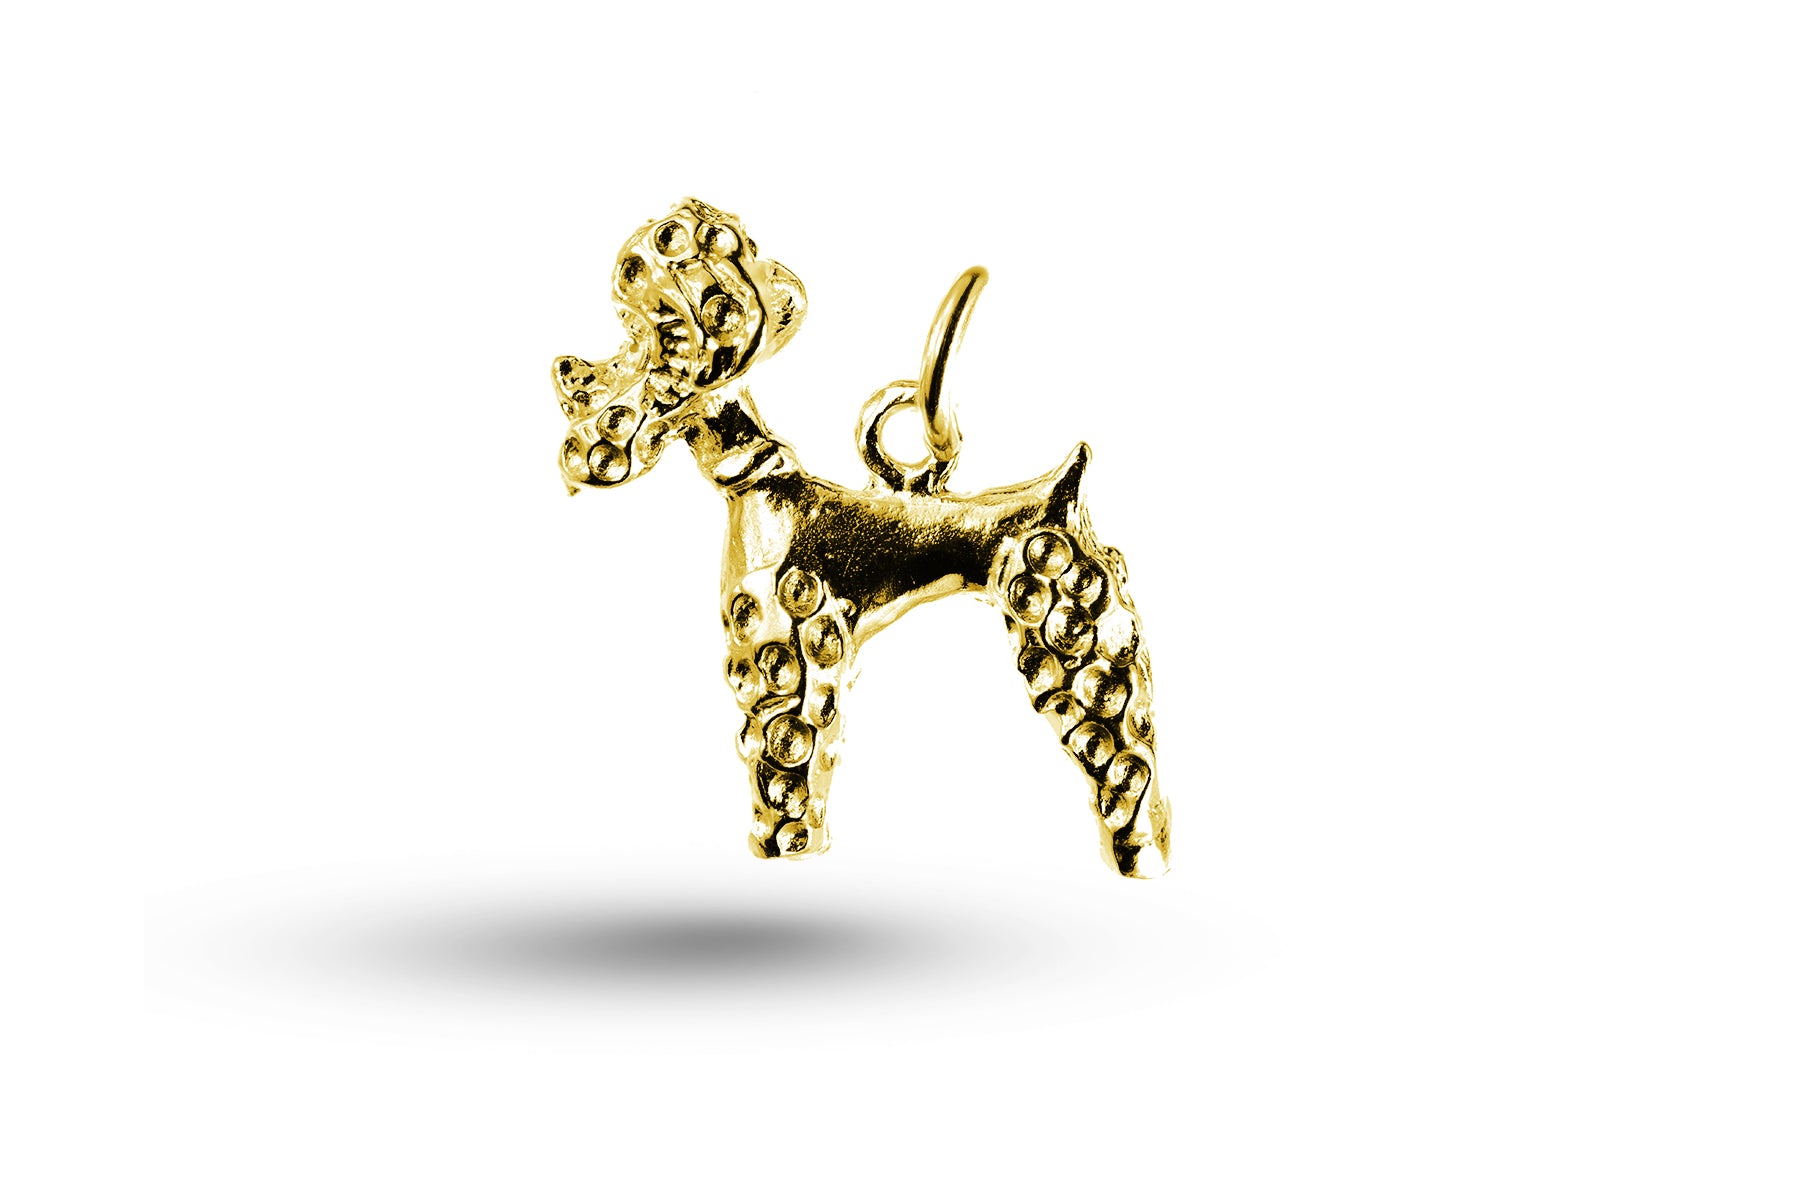 Yellow gold Poodle Dog charm.